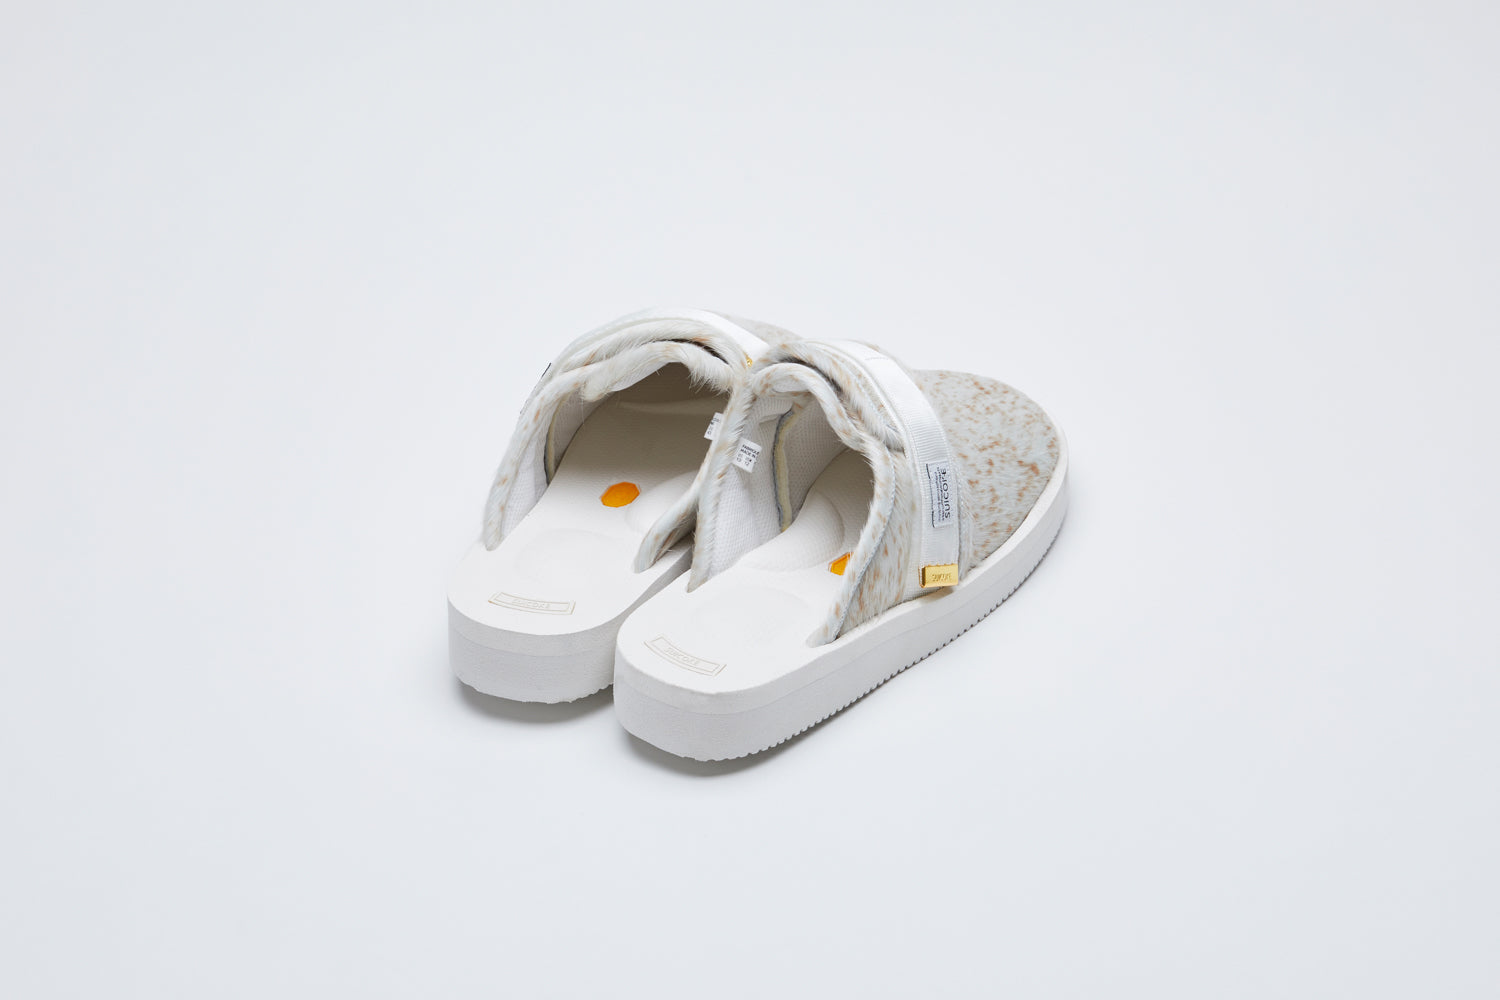 SUICOKE ZAVO-Vhl closed toe slides with white-brown speckled colored calf hair upper, white midsole and sole, nylon straps with logo patch and gold logoed tabs.  From Fall/Winter 2021 collection on SUICOKE Official US &amp; Canada Webstore.